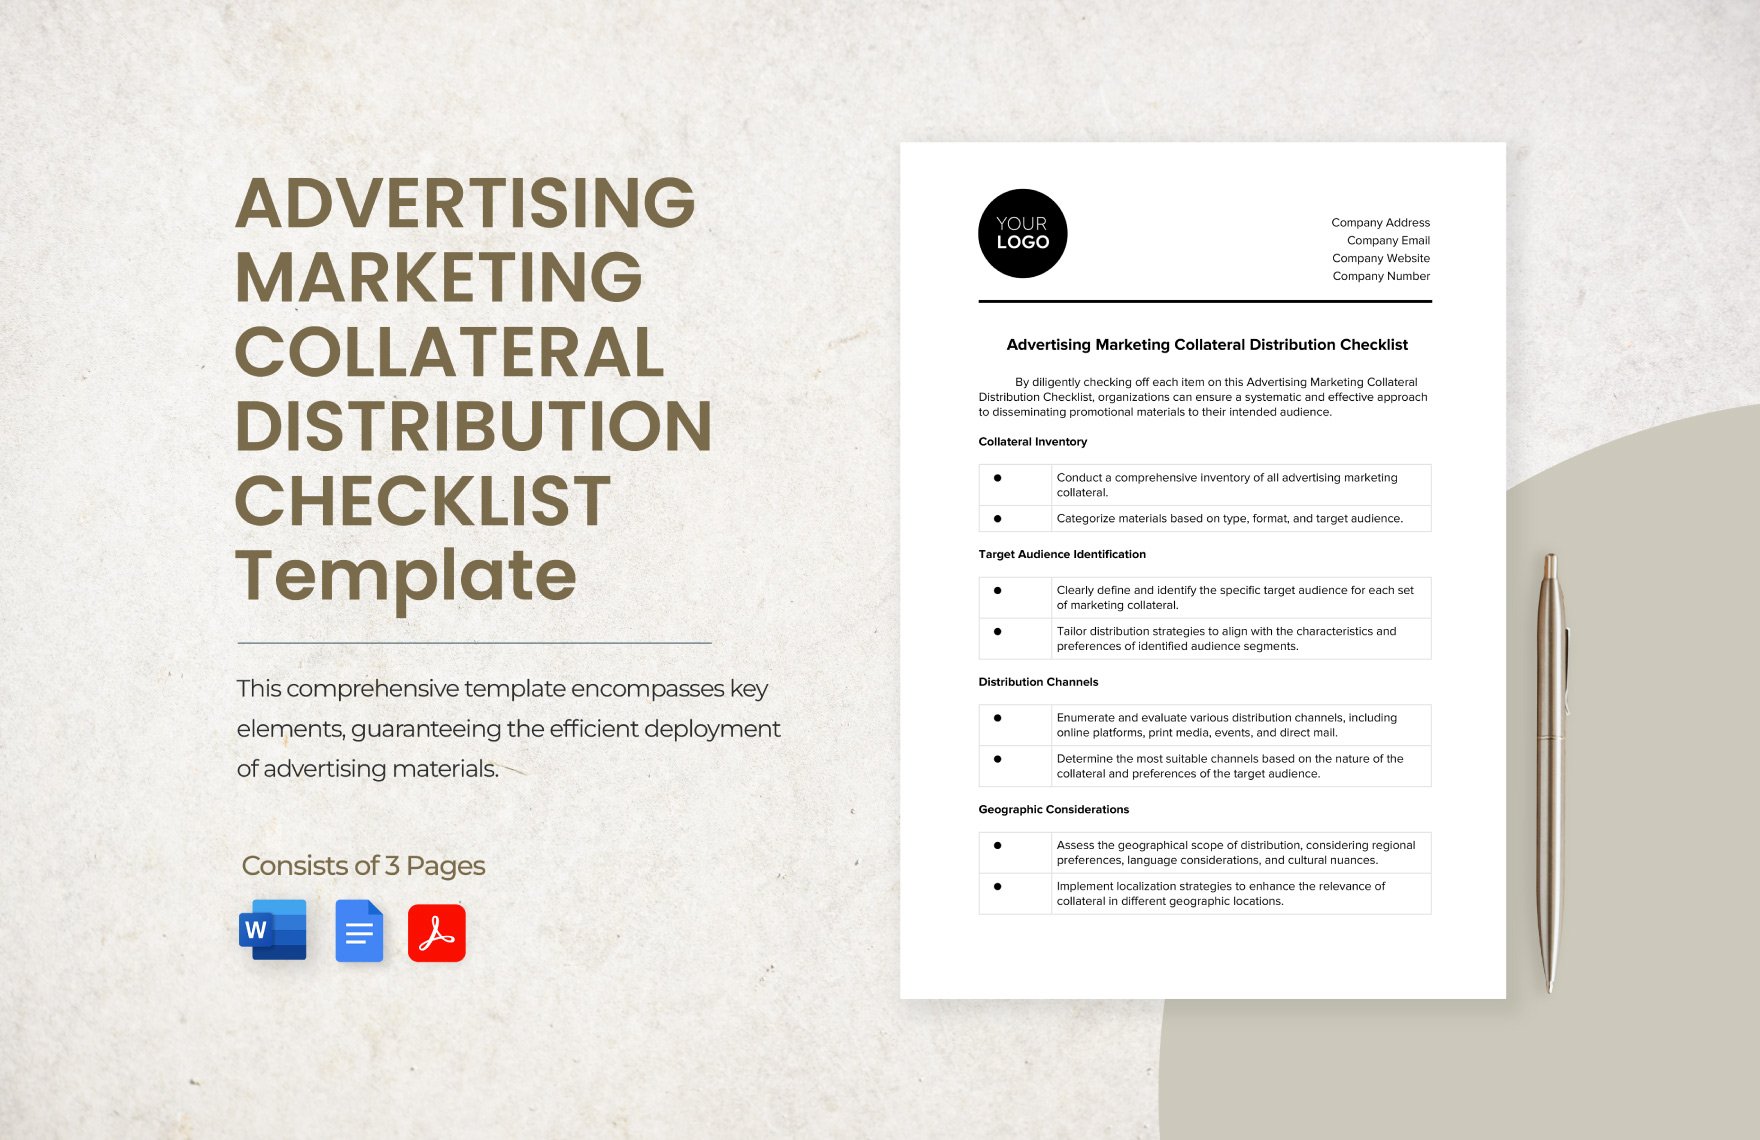 Advertising Marketing Collateral Distribution Checklist Template